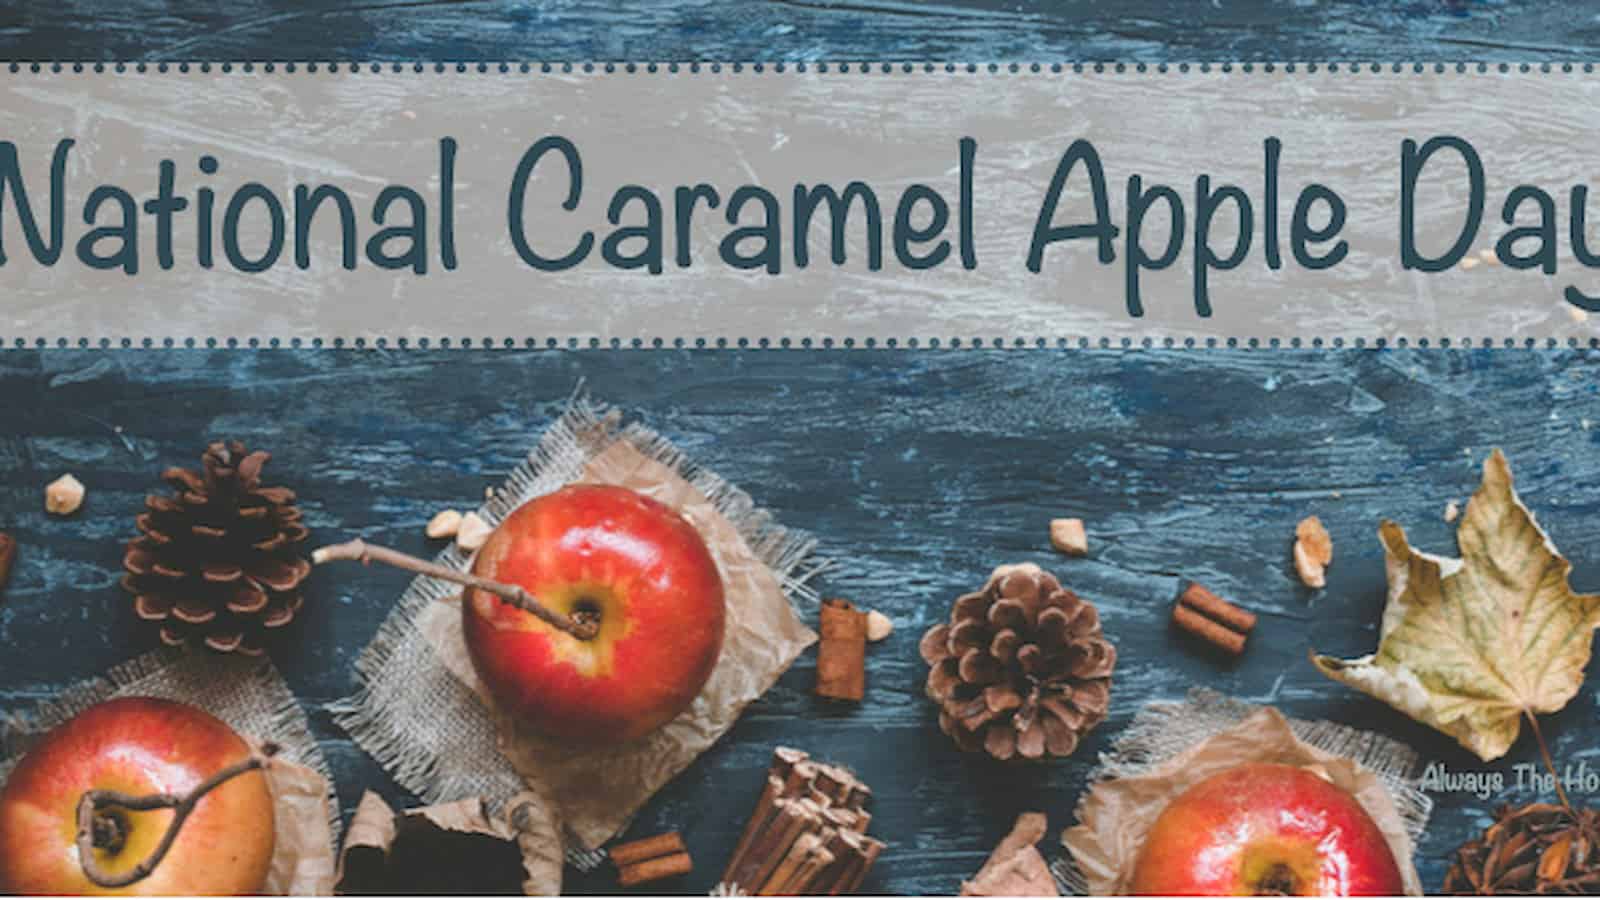 National Caramel Apple Day Quotes, Wishes And Messages